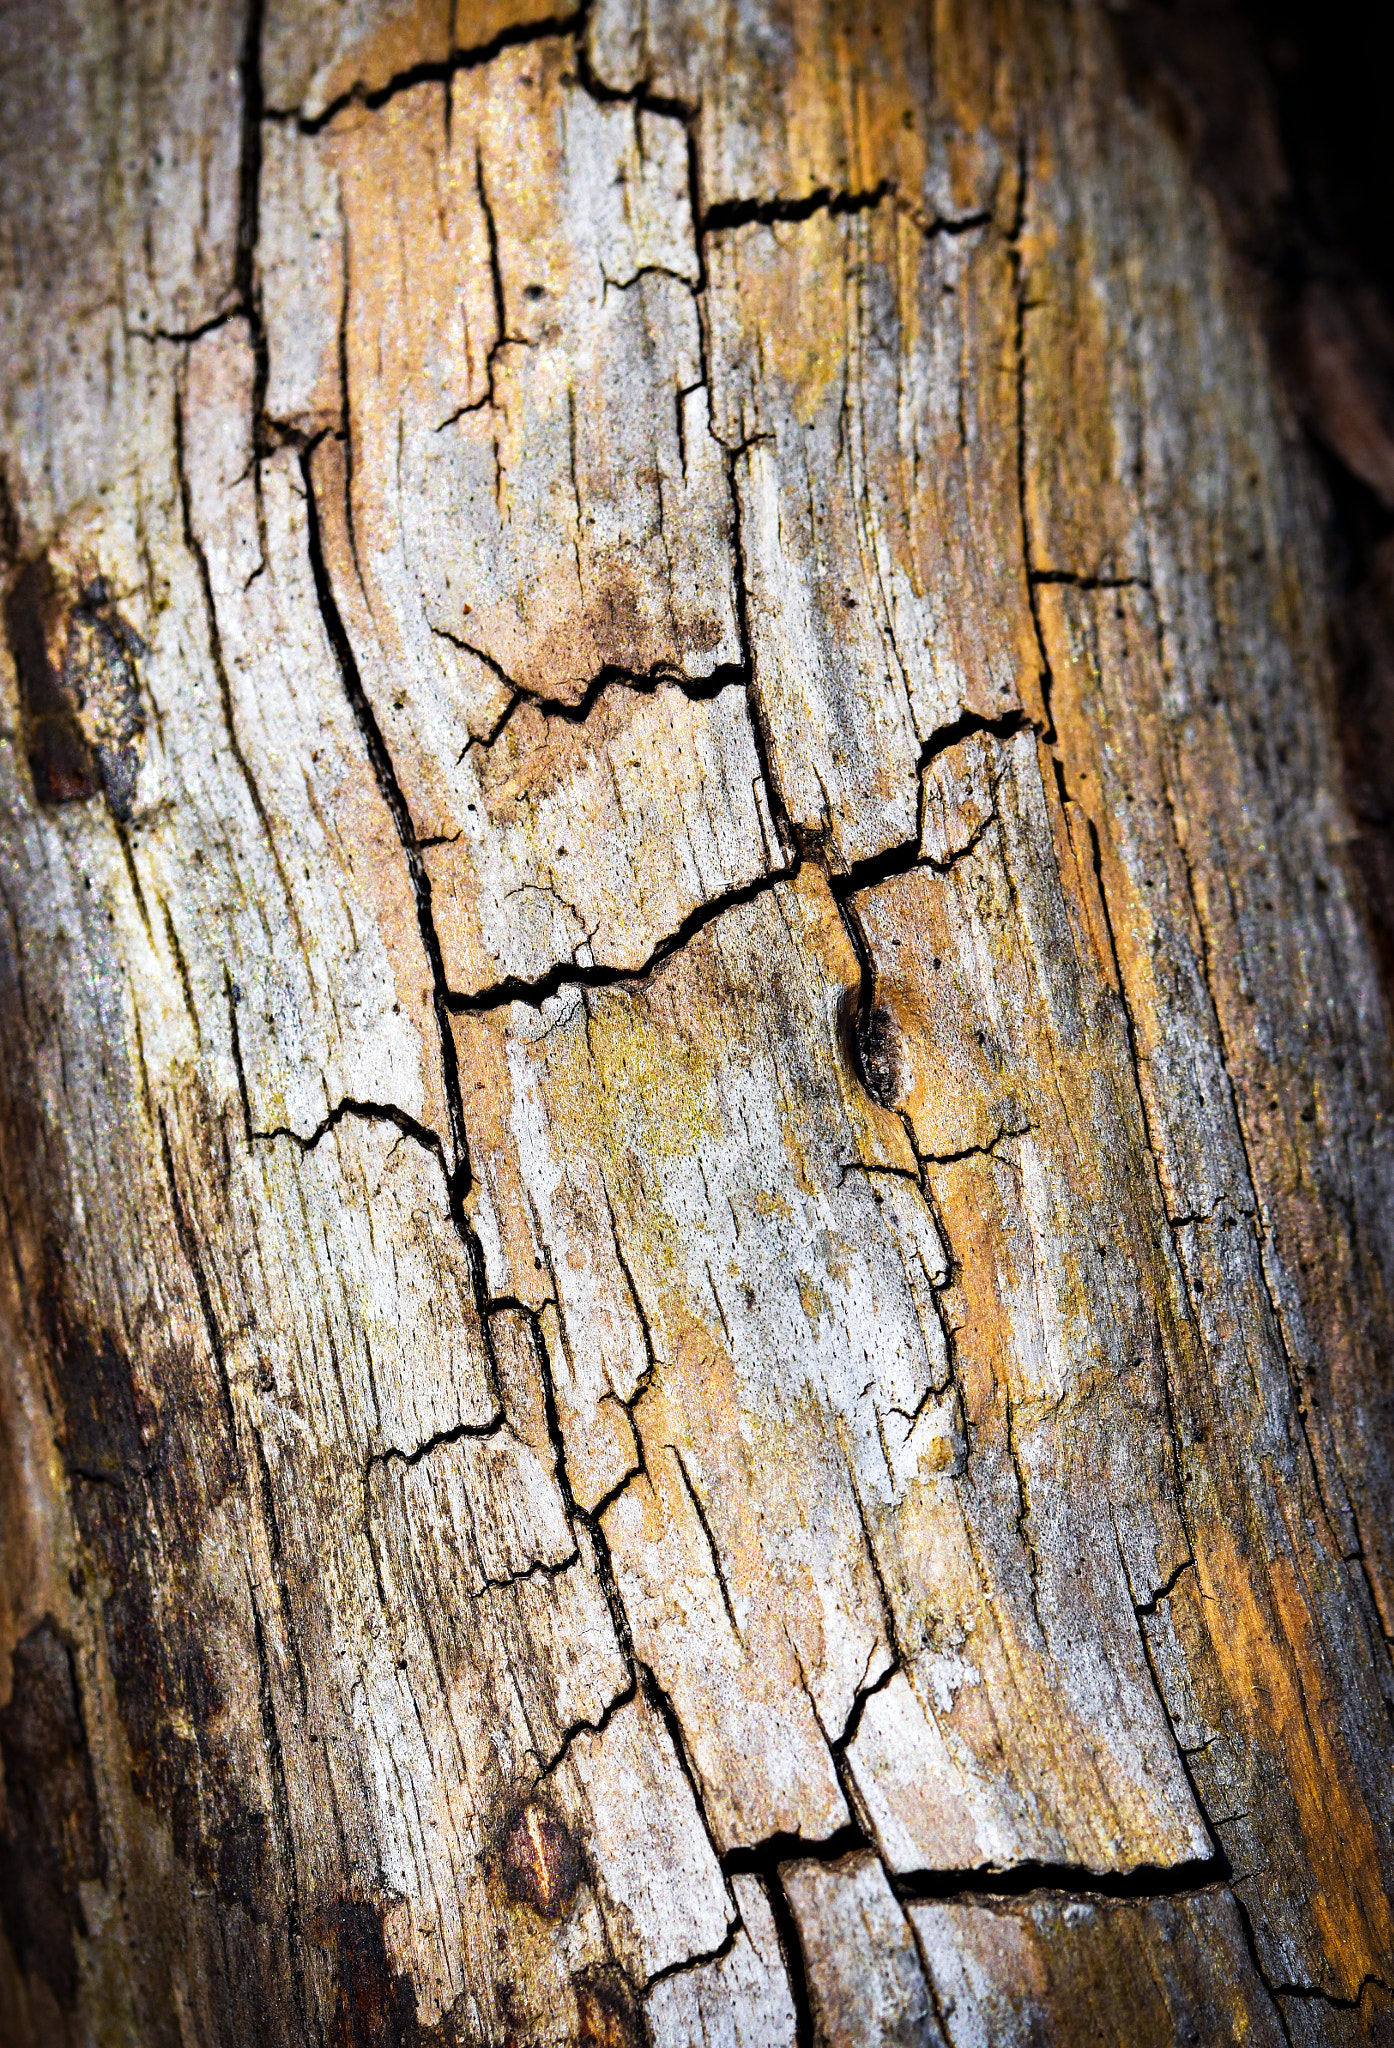 Nikon D5500 + Tamron SP 90mm F2.8 Di VC USD 1:1 Macro (F004) sample photo. With cracks old tree trunk photography